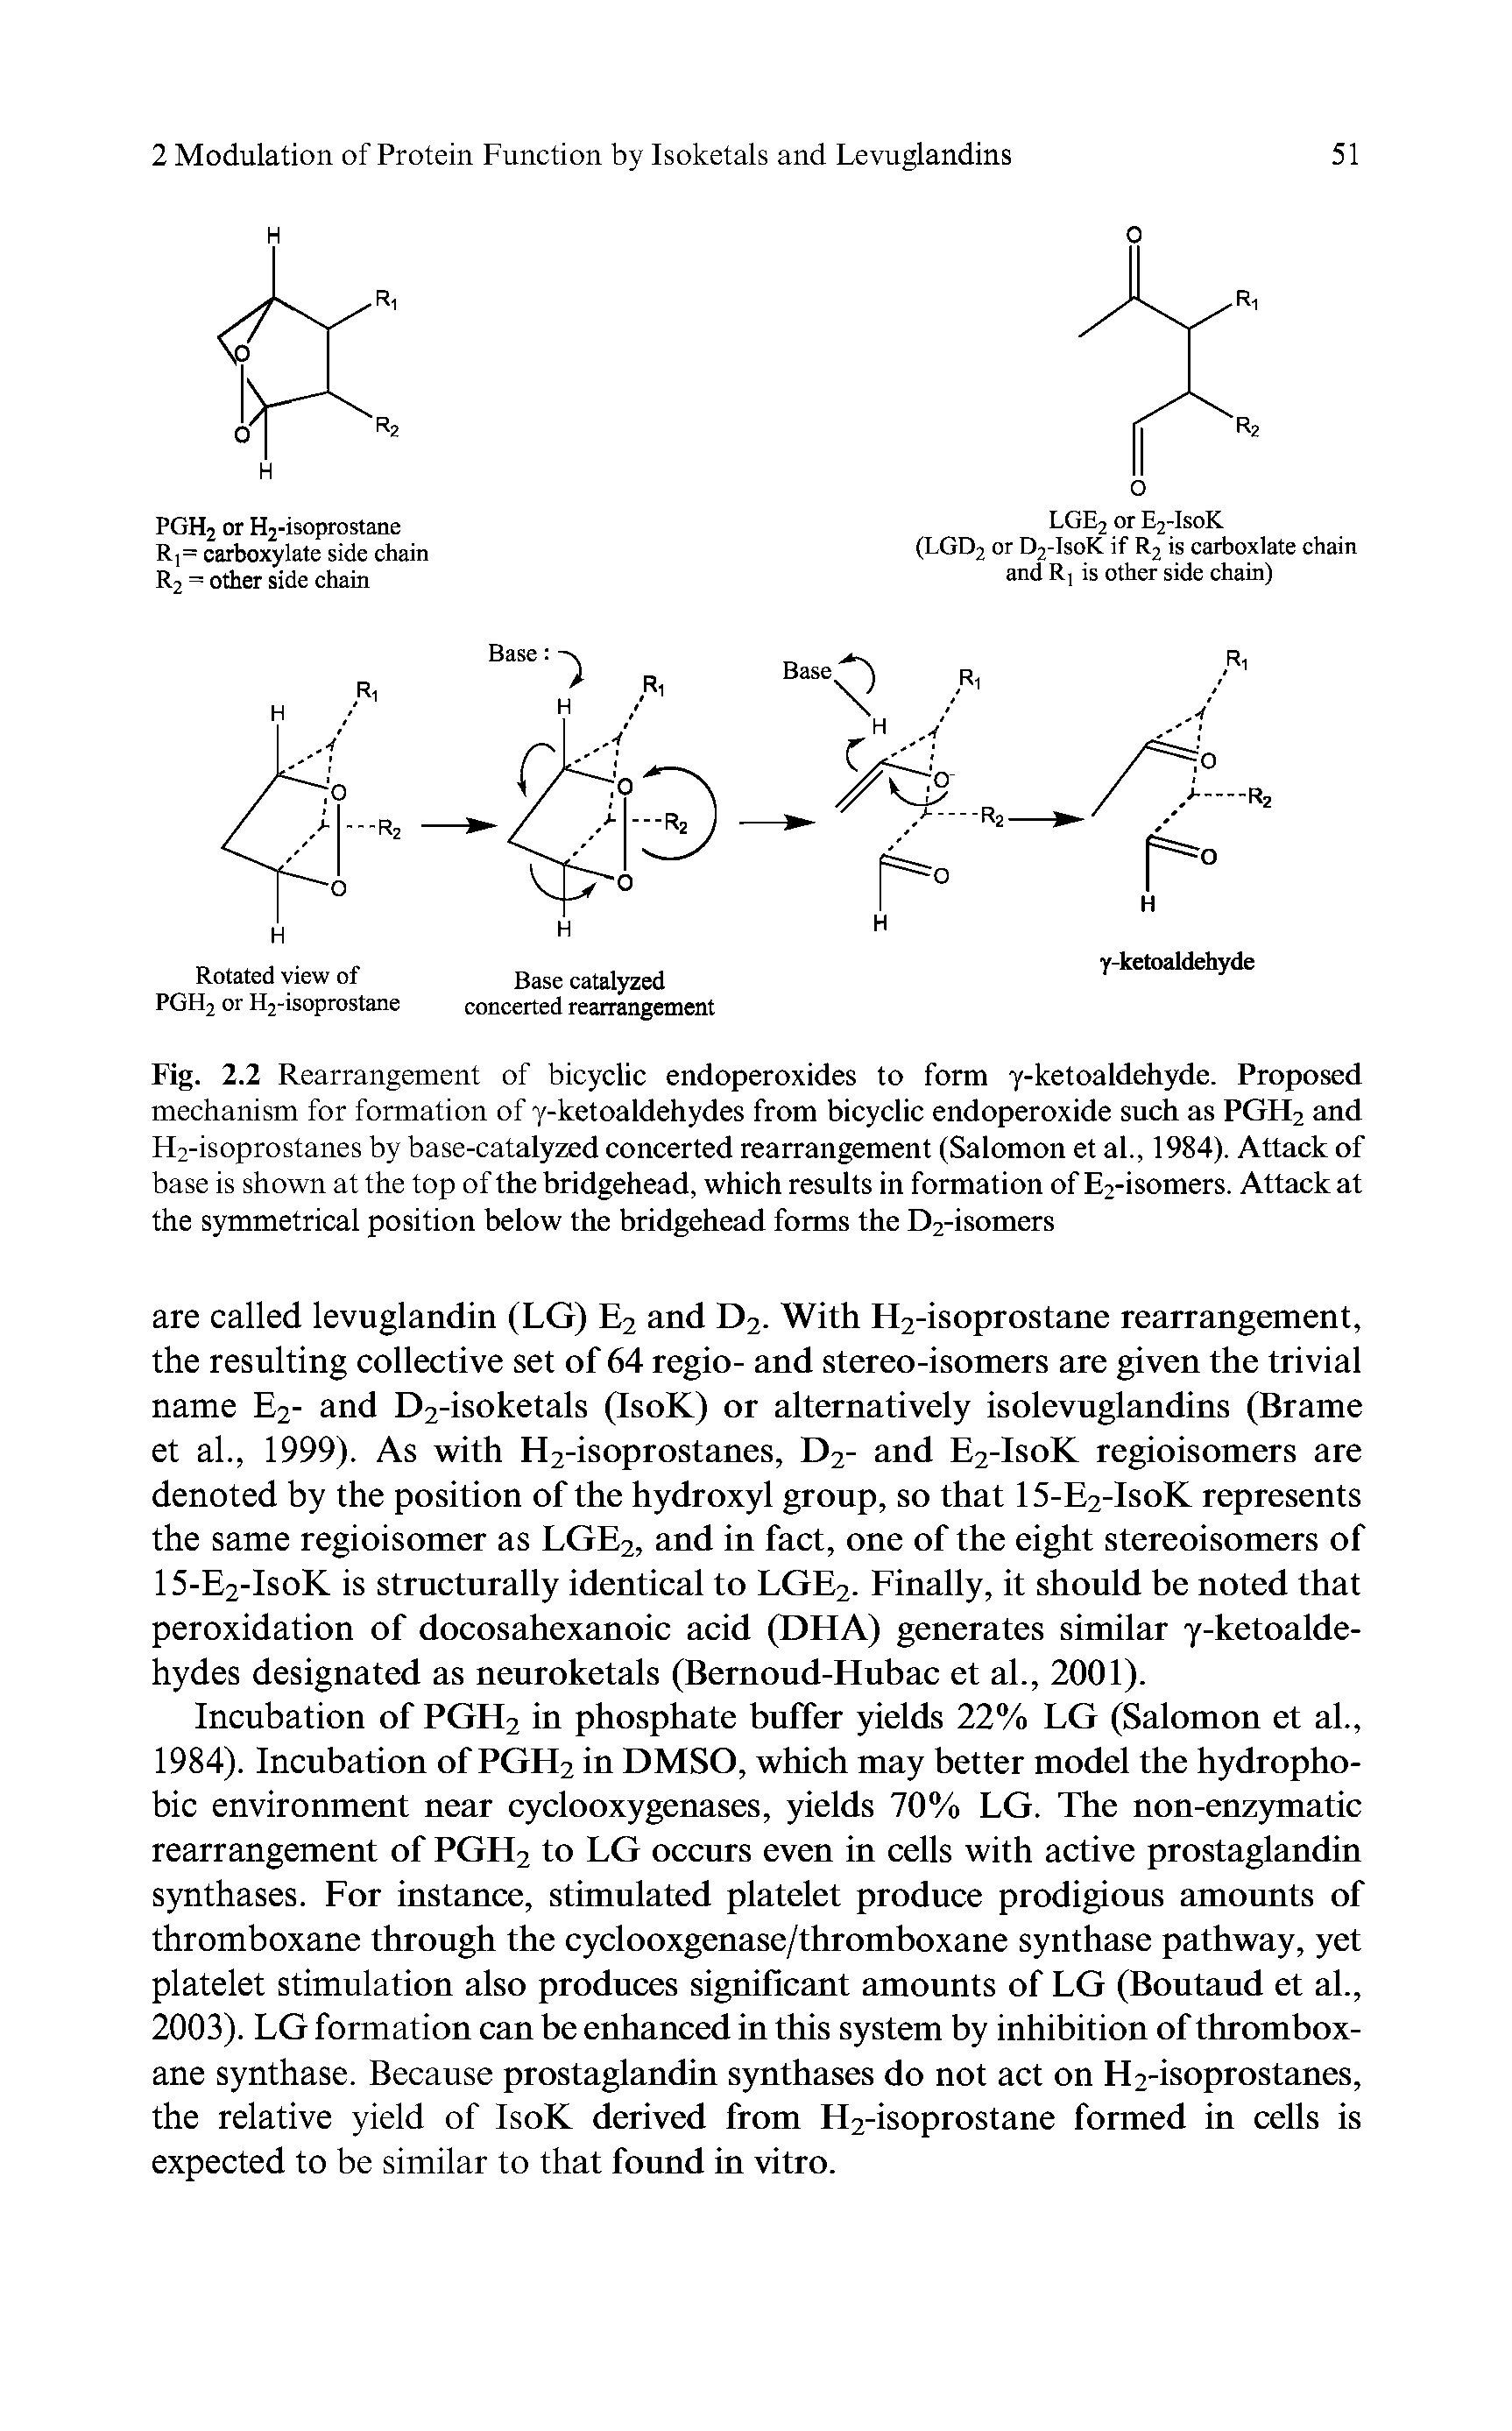 Fig. 2.2 Rearrangement of bicyclic endoperoxides to form y-ketoaldehyde. Proposed mechanism for formation of y-ketoaldehydes from bicyclic endoperoxide such as PGFI2 and H2-isoprostanes by base-catalyzed concerted rearrangement (Salomon et al., 1984). Attack of base is shown at the top of the bridgehead, which results in formation of E2-isomers. Attack at the symmetrical position below the bridgehead forms the D2-isomers...